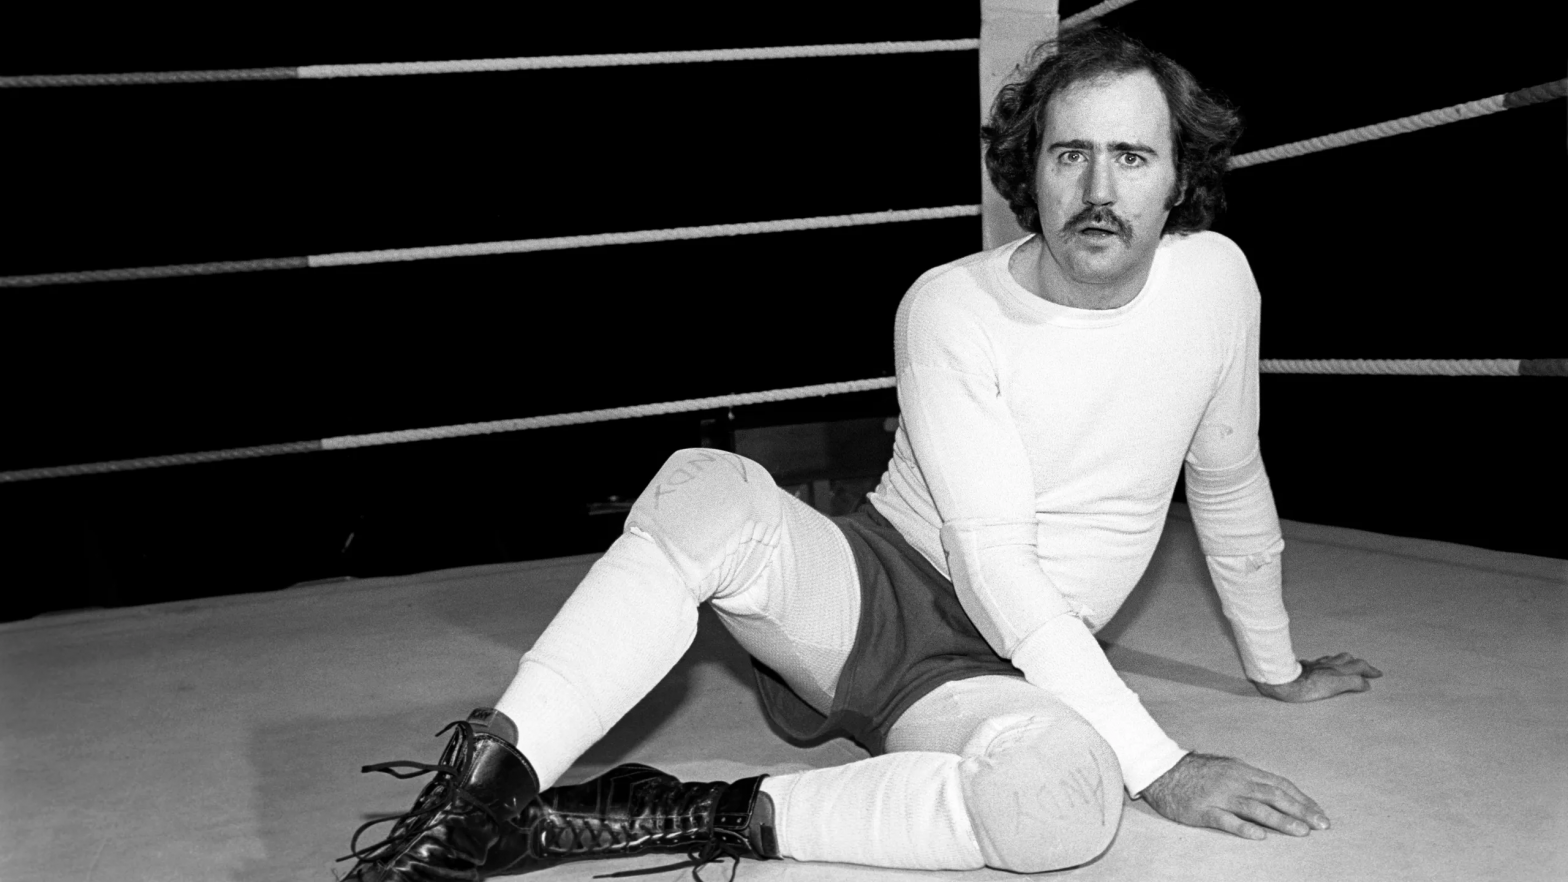 Andy Kaufman: Net worth, age, relationship, career, family